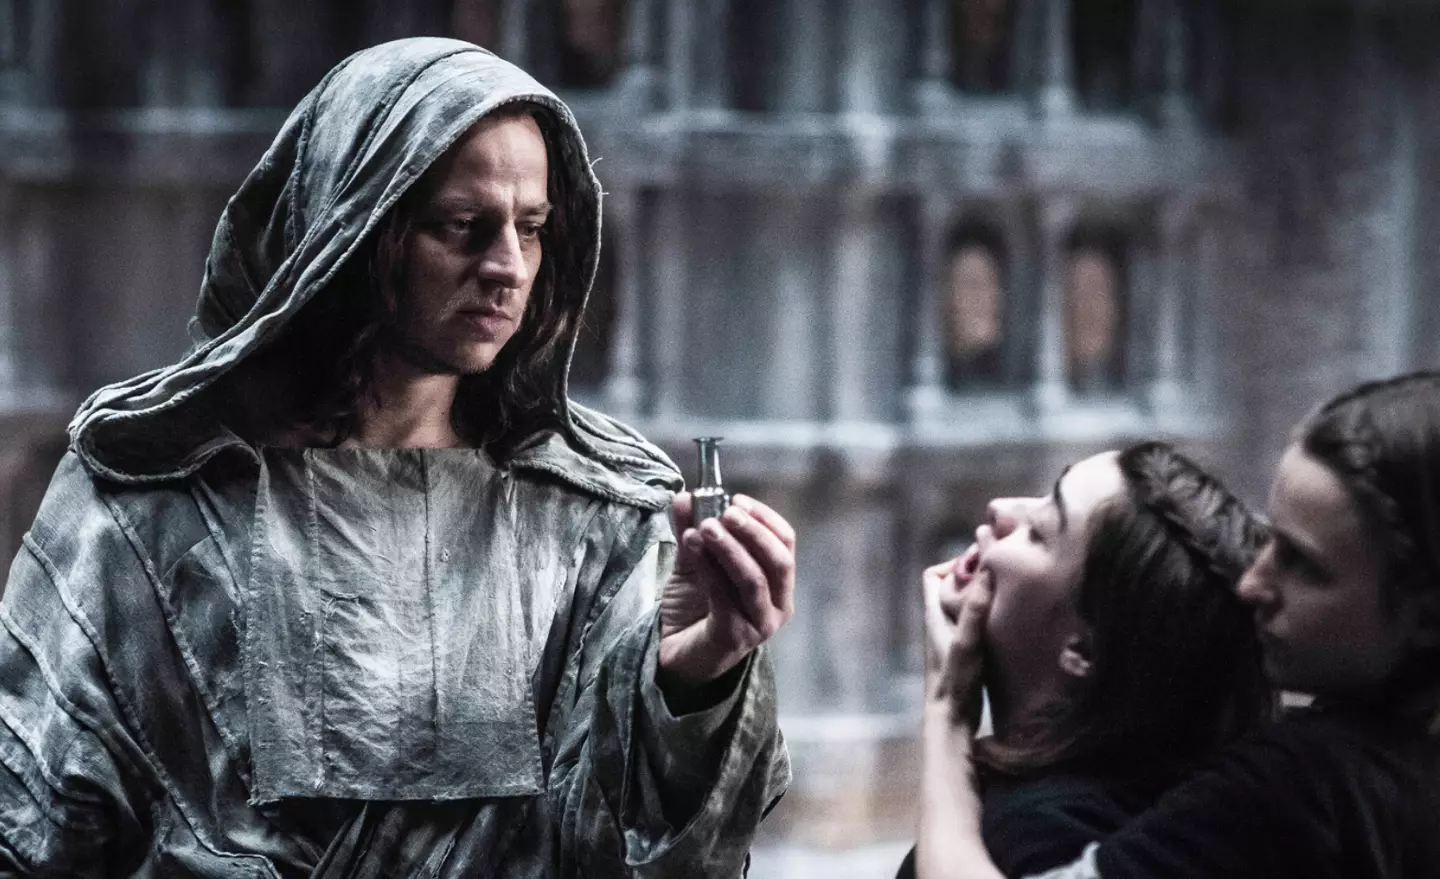 A TikToker revealed how she realised actor Tom Wlaschiha also starred in Game of Thrones.